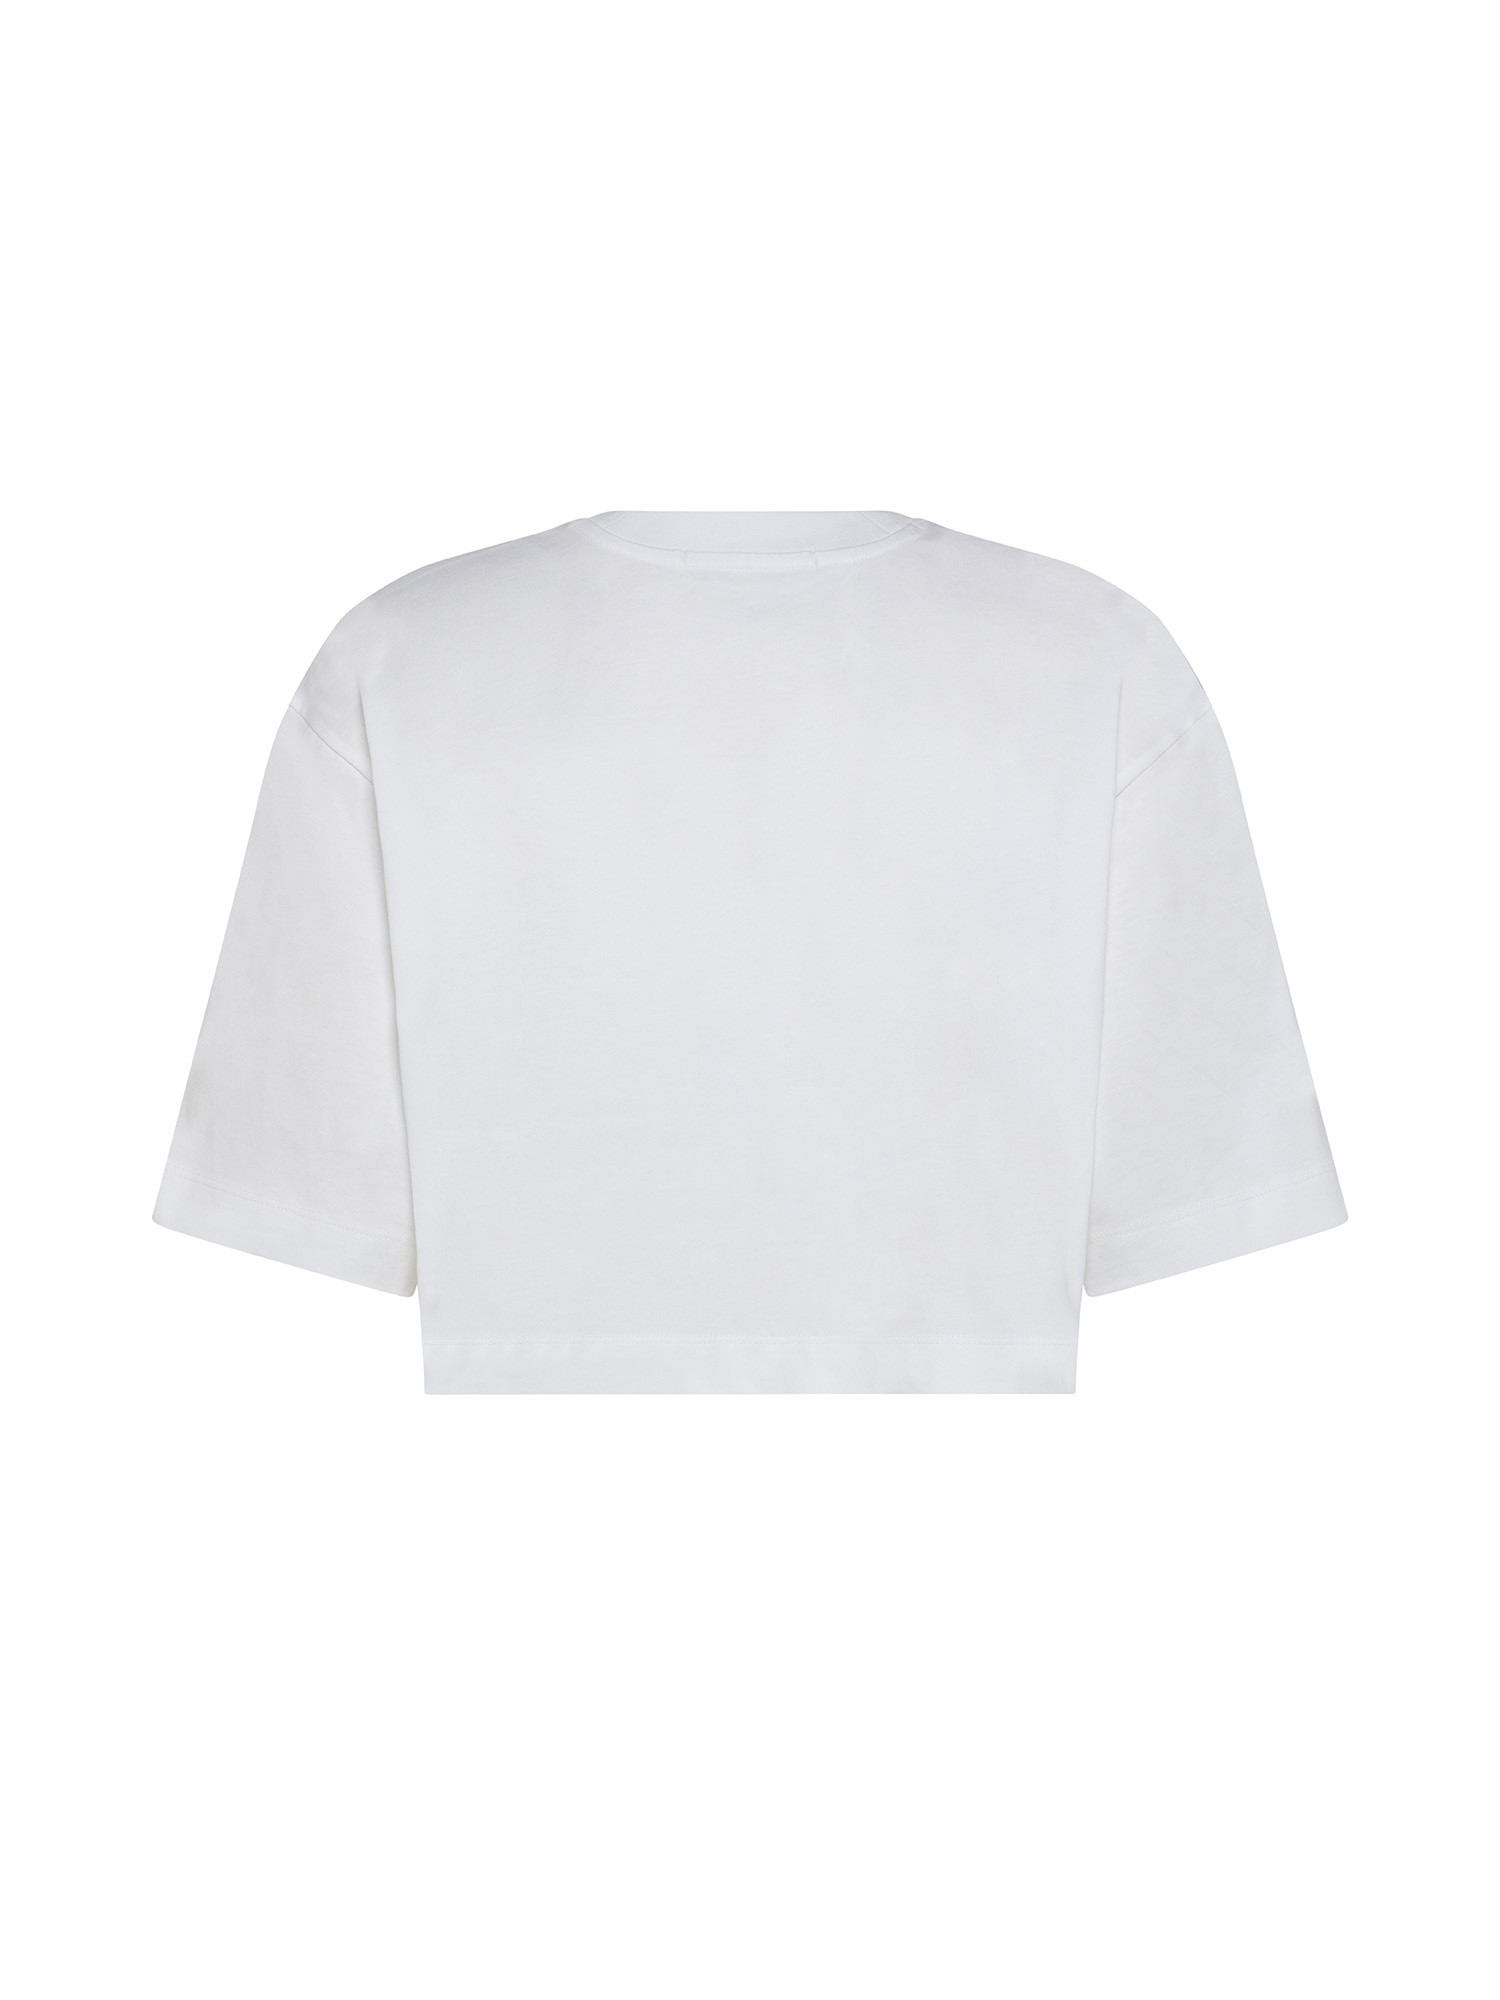 Calvin Klein Jeans - T-shirt crop in cotone con logo, Bianco, large image number 1